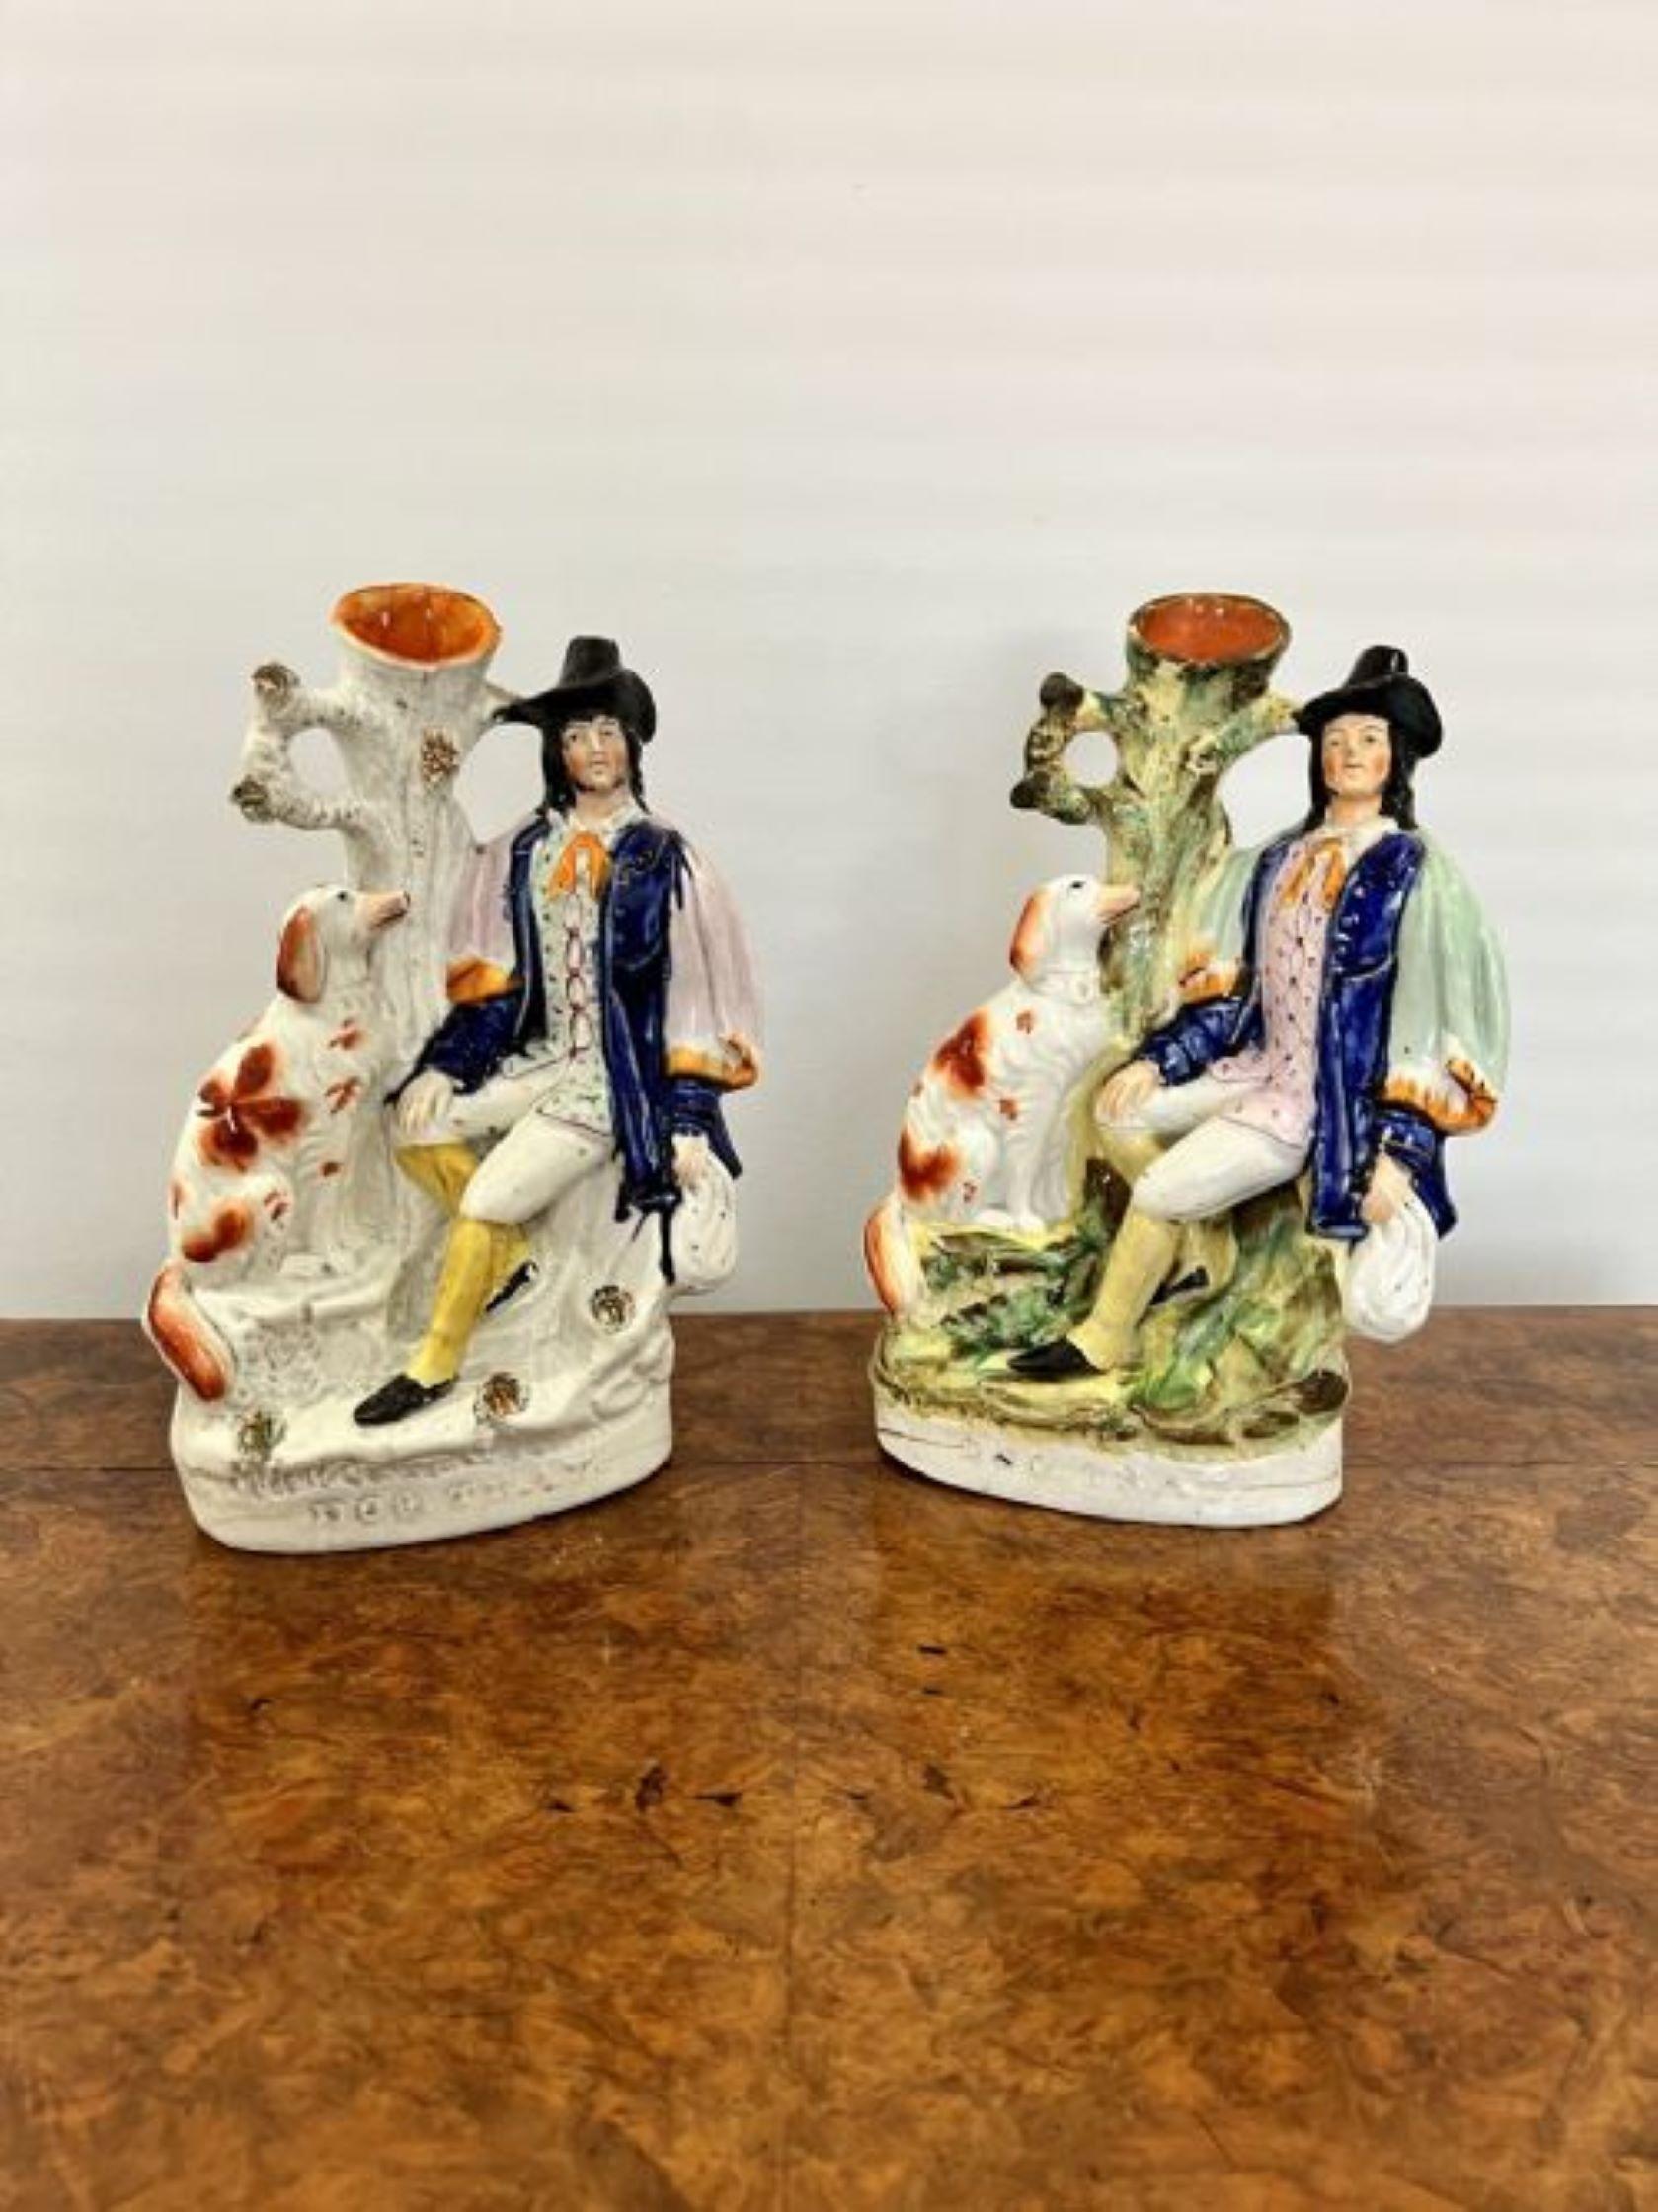 Fantastic rare large pair of antique Victorian Staffordshire figures having a fantastic rare pair of staffordshire figures with a man in lovely period clothing, a dog and a tree surrounded by foliage in vibrant green, blue, white, yellow and red